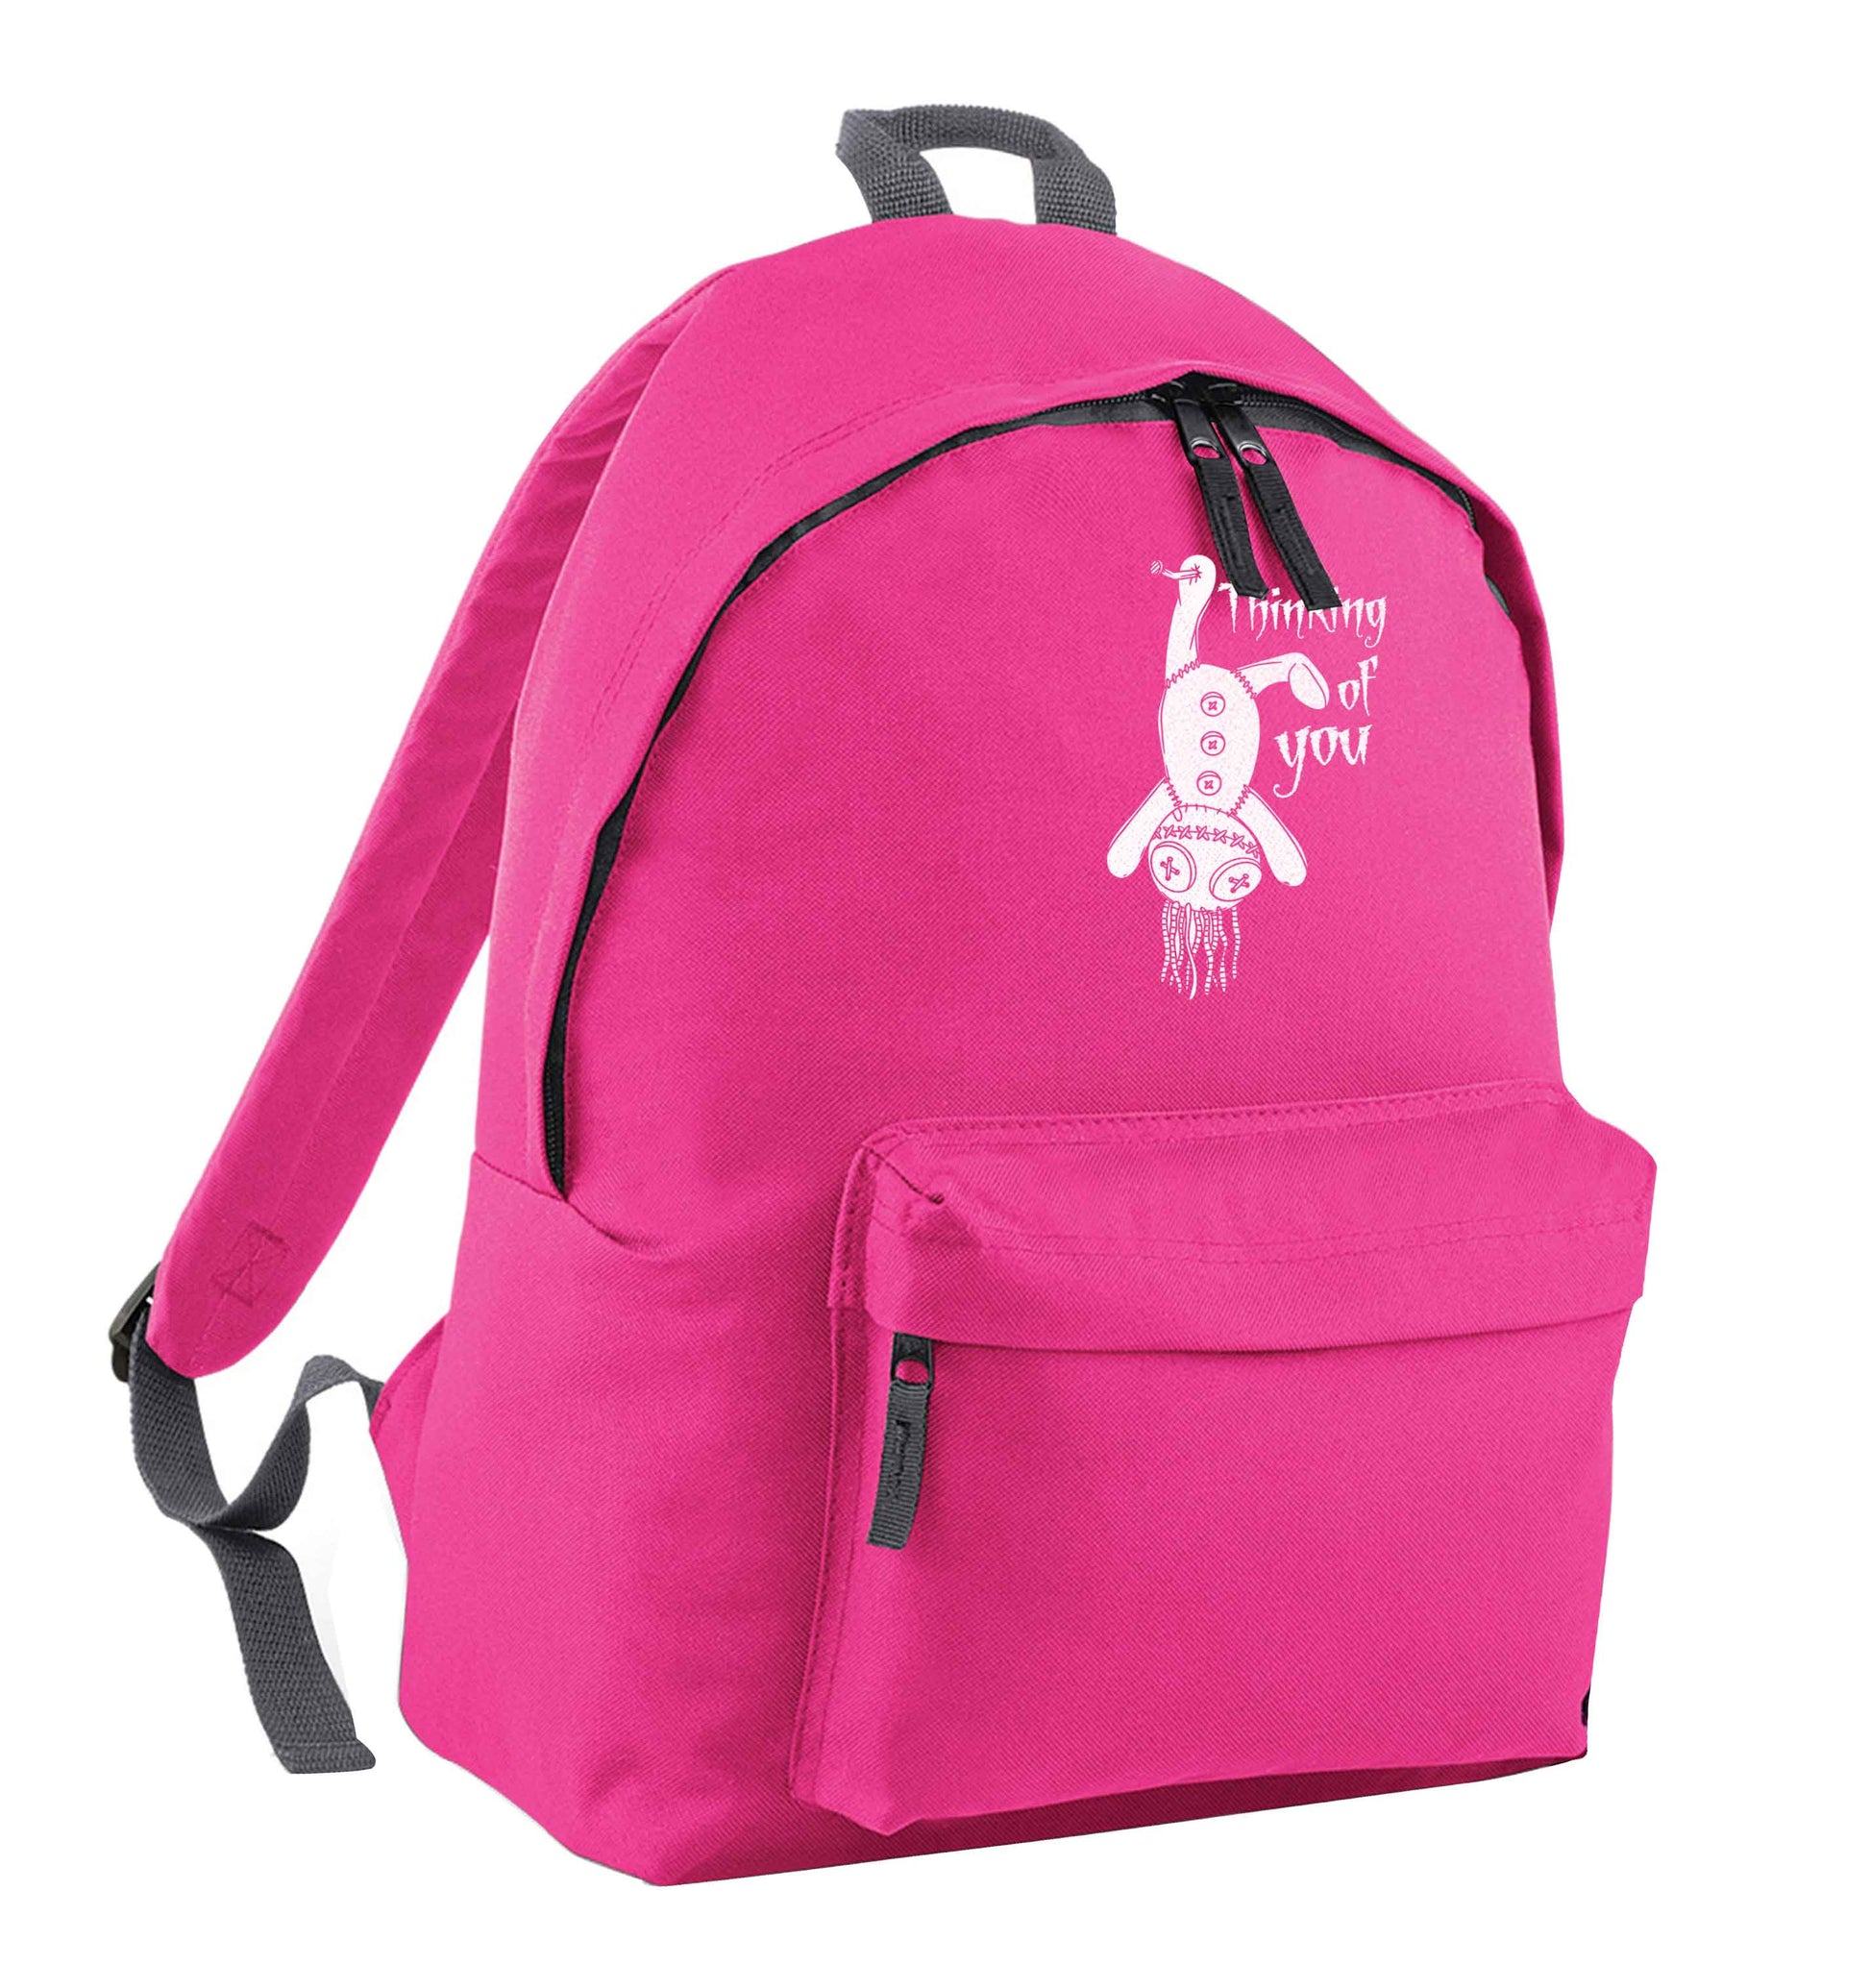 Thinking of you pink adults backpack